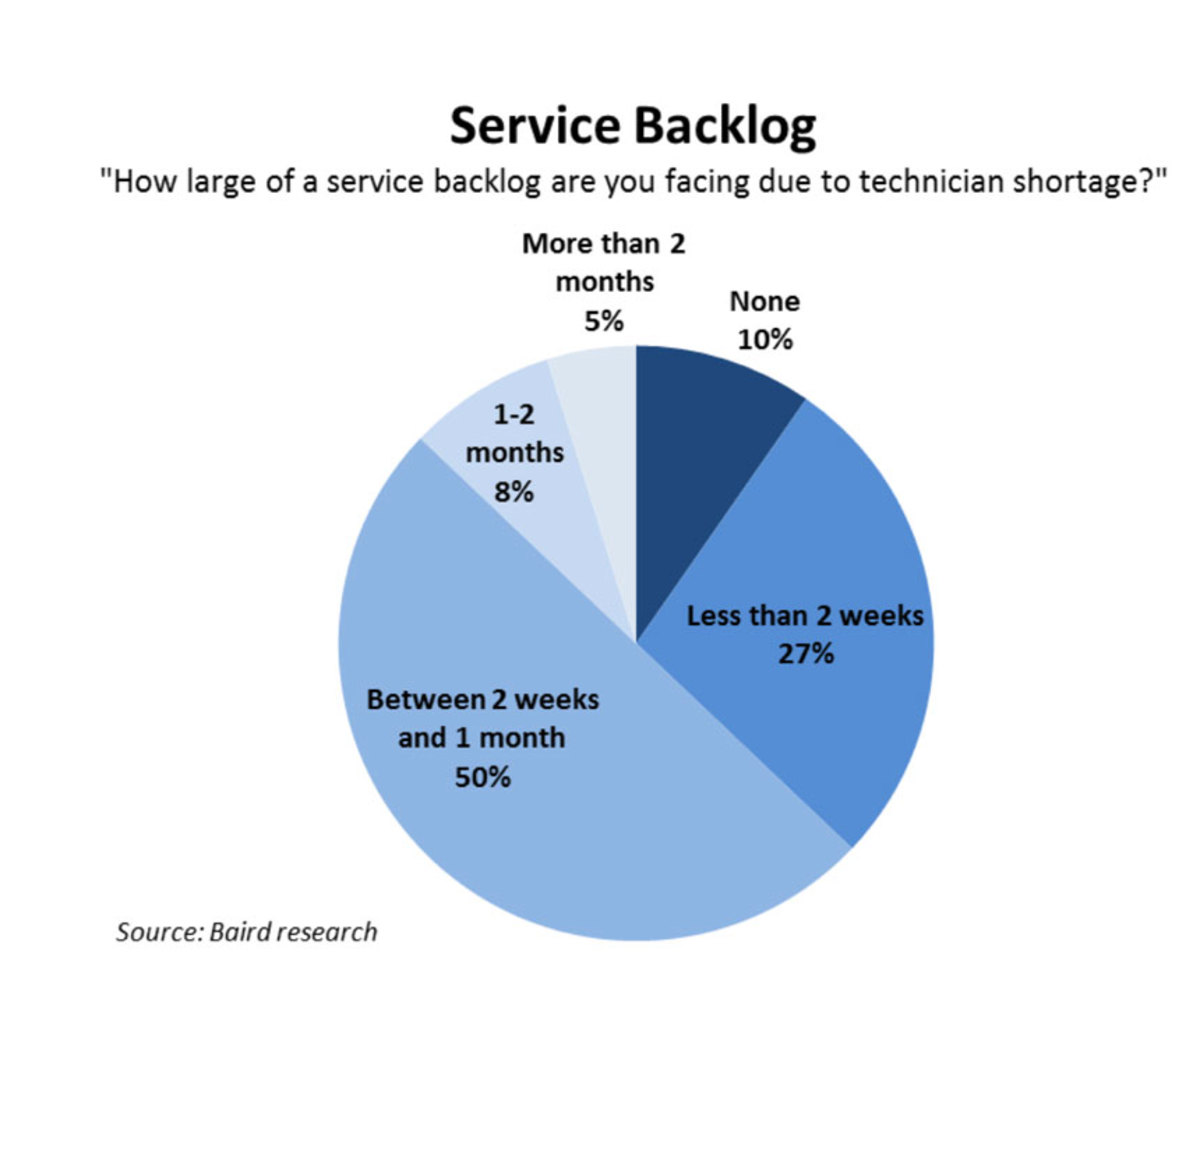 Most dealer respondents said they have a service backlog, with just 10 percent saying they had none.